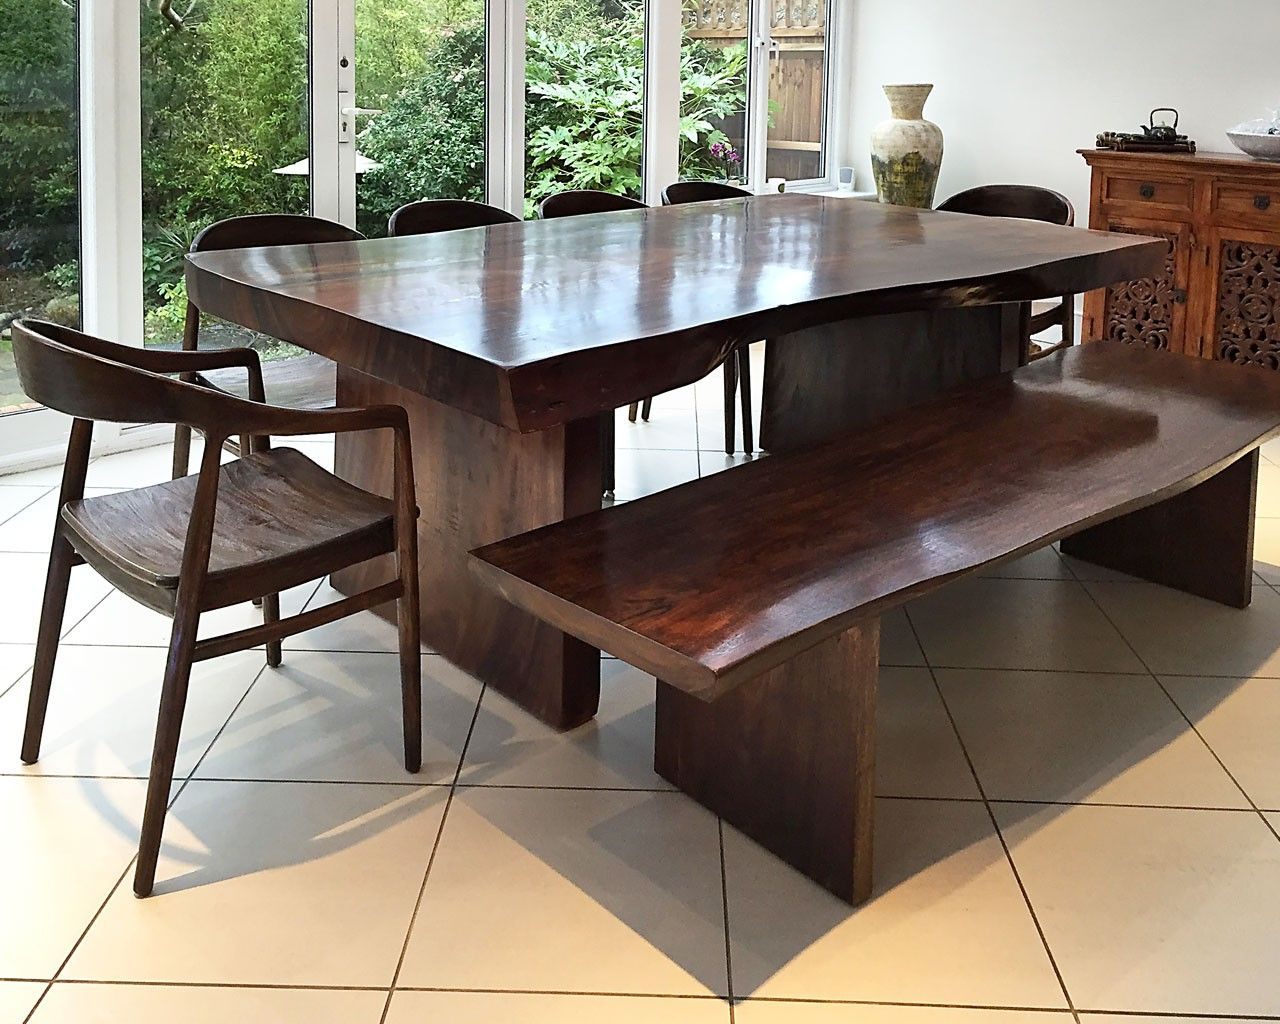 Bespoke Suar Dining Table Stained Dark With Matching Suar within dimensions 1280 X 1024